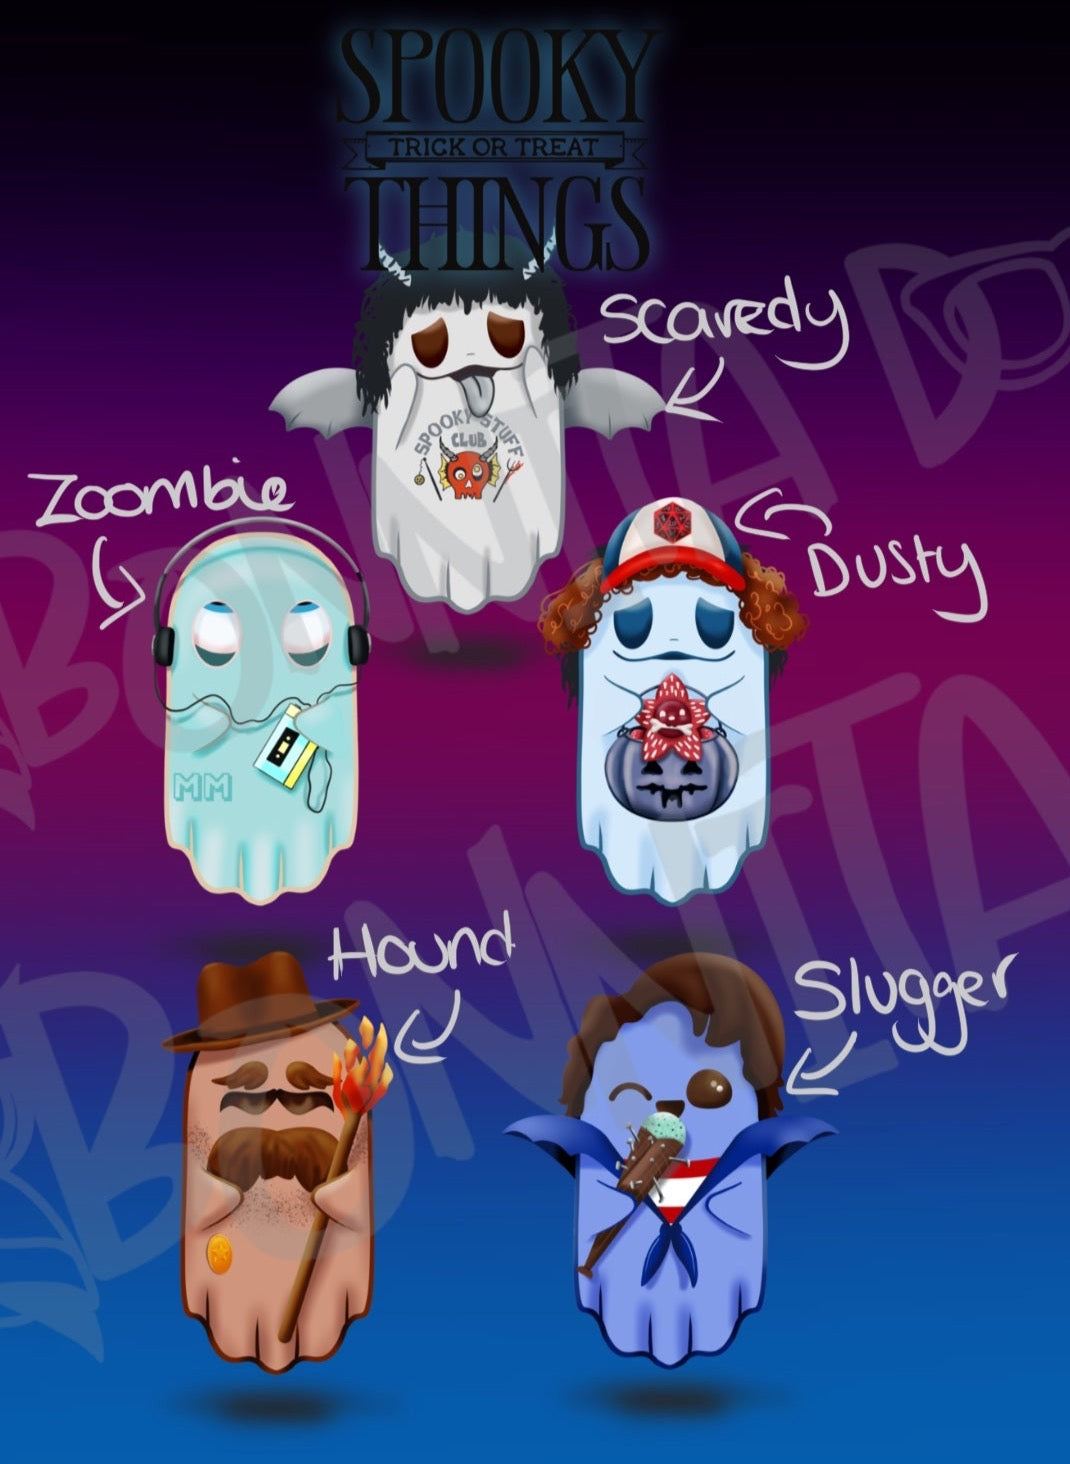 Spooky things - gang stickers- meet the crew